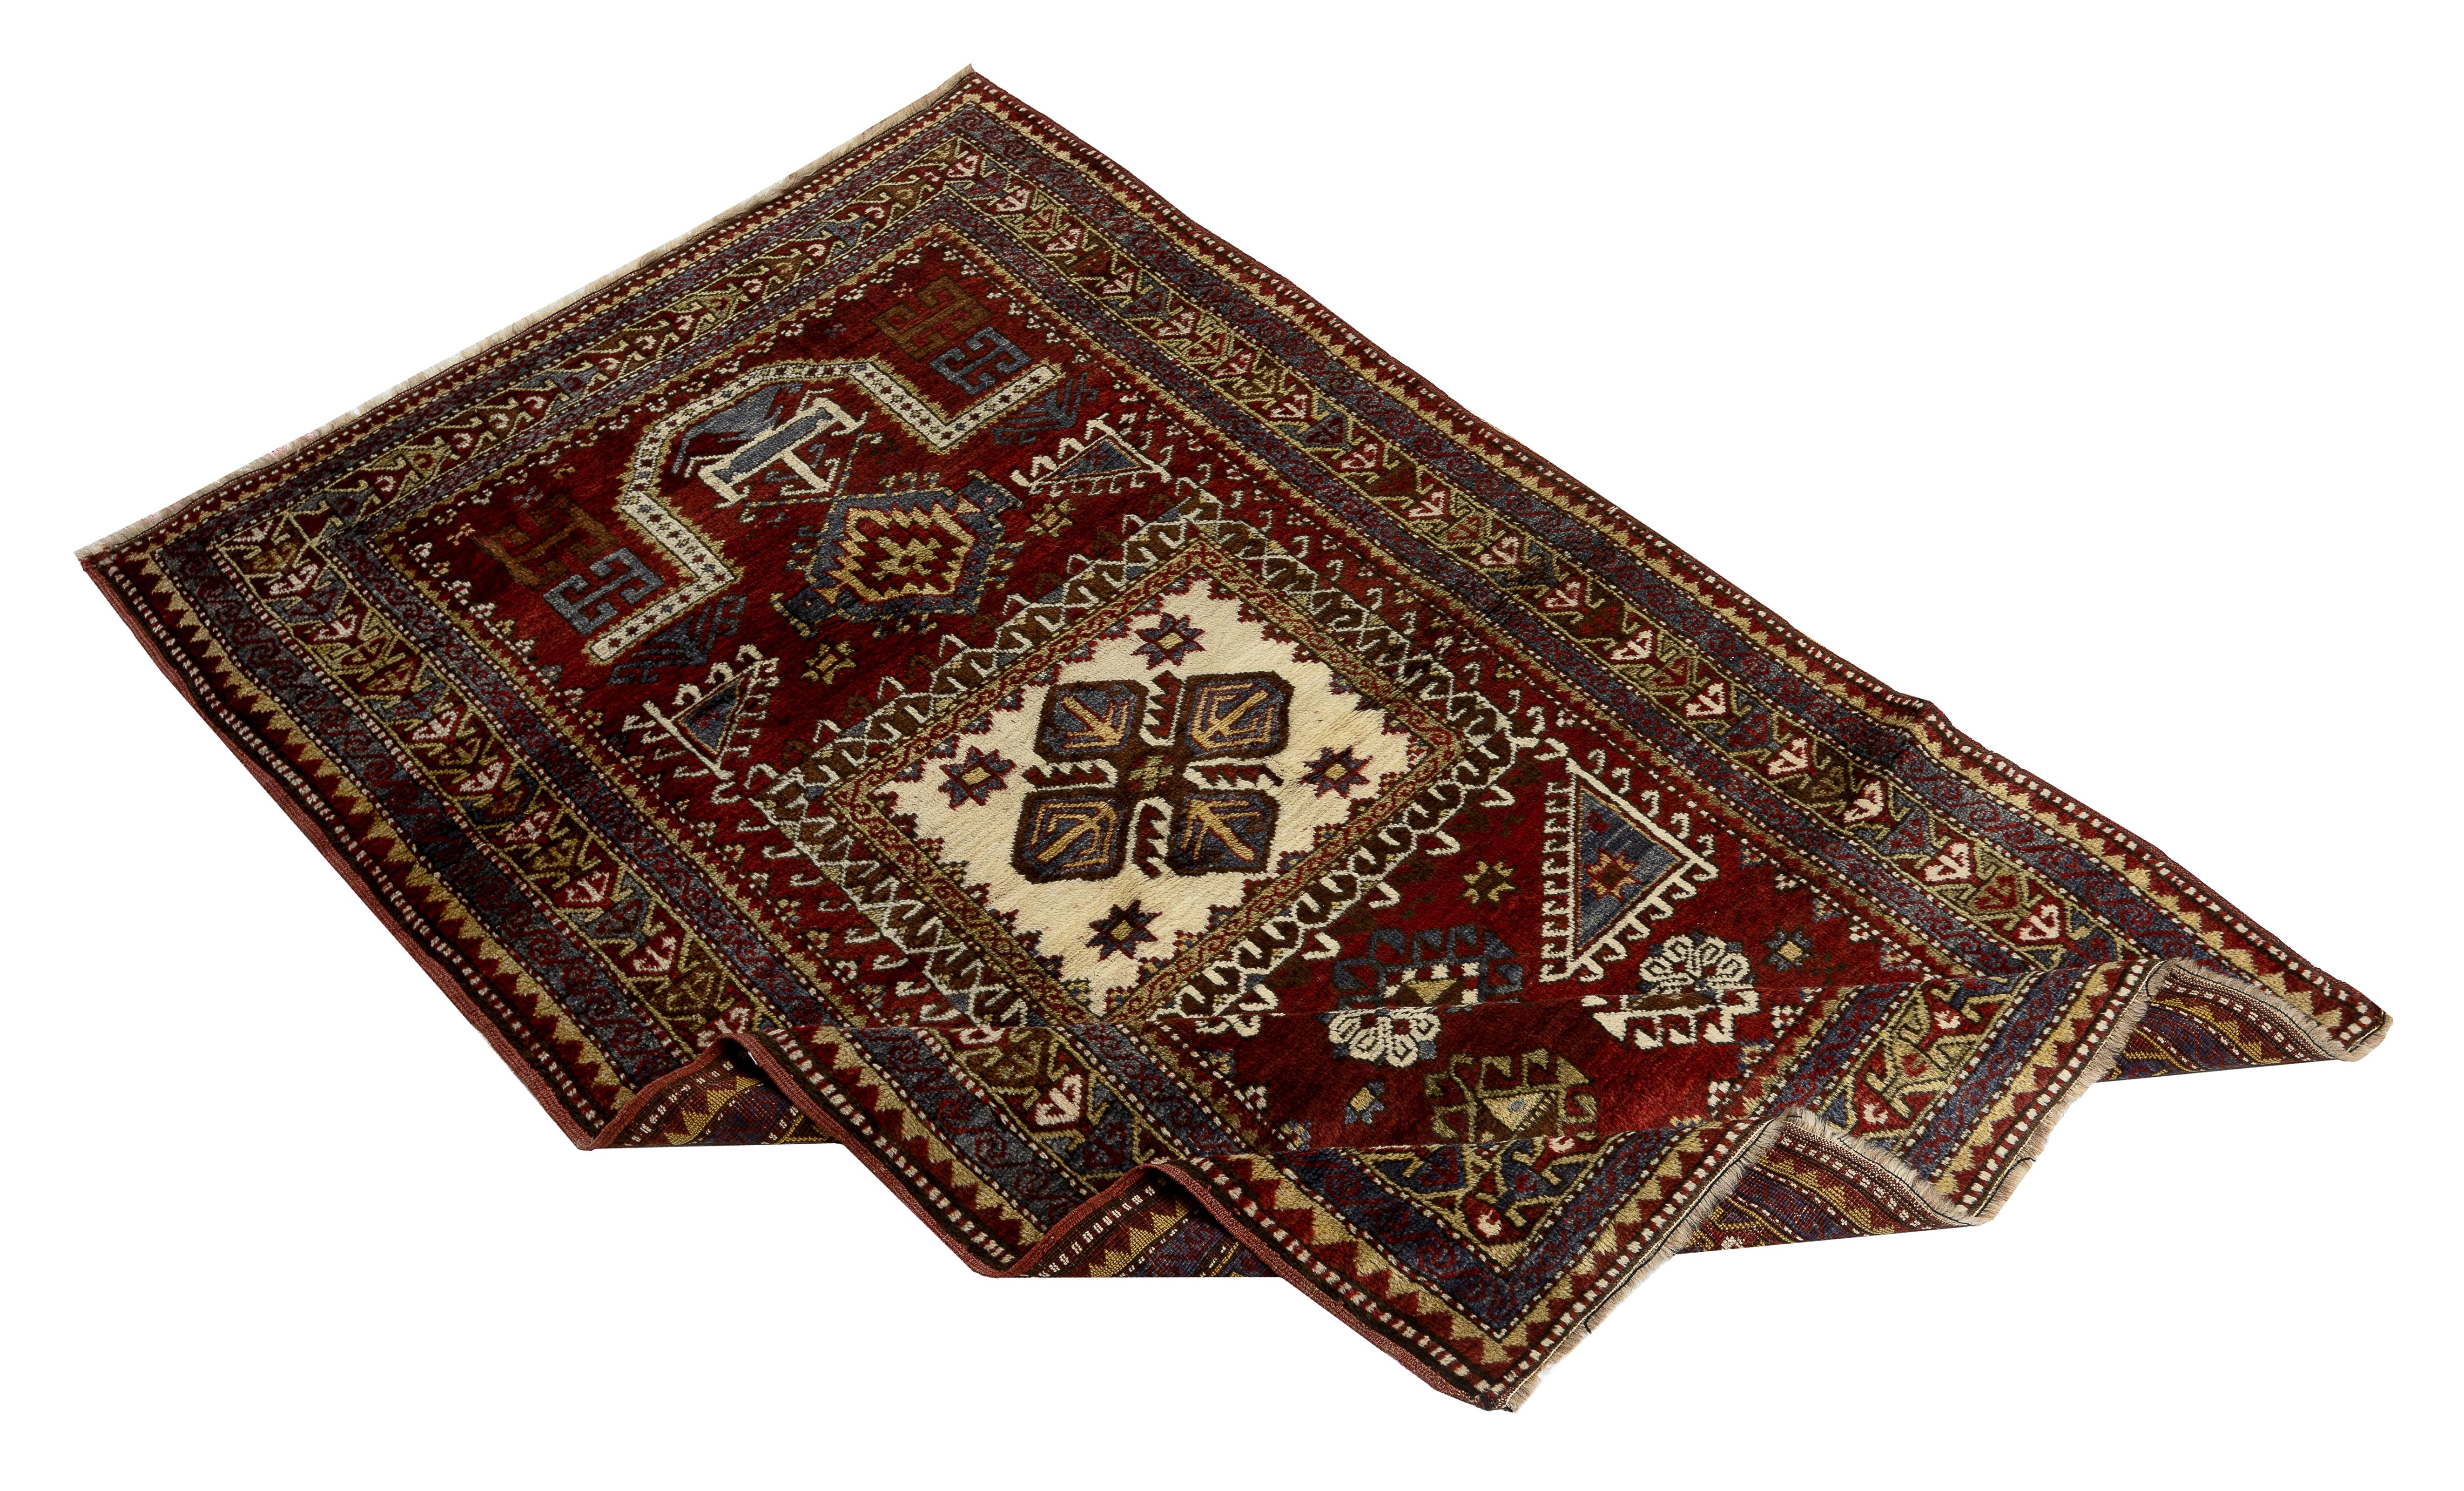 A semi antique Caucasian Fachralo Kazak prayer rug made of even medium wool pile on wool foundation and natural dyes.
Excellent condition. Sturdy and as clean as a brand new rug (deep washed professionally). 
Size: 4.2x7 Ft.